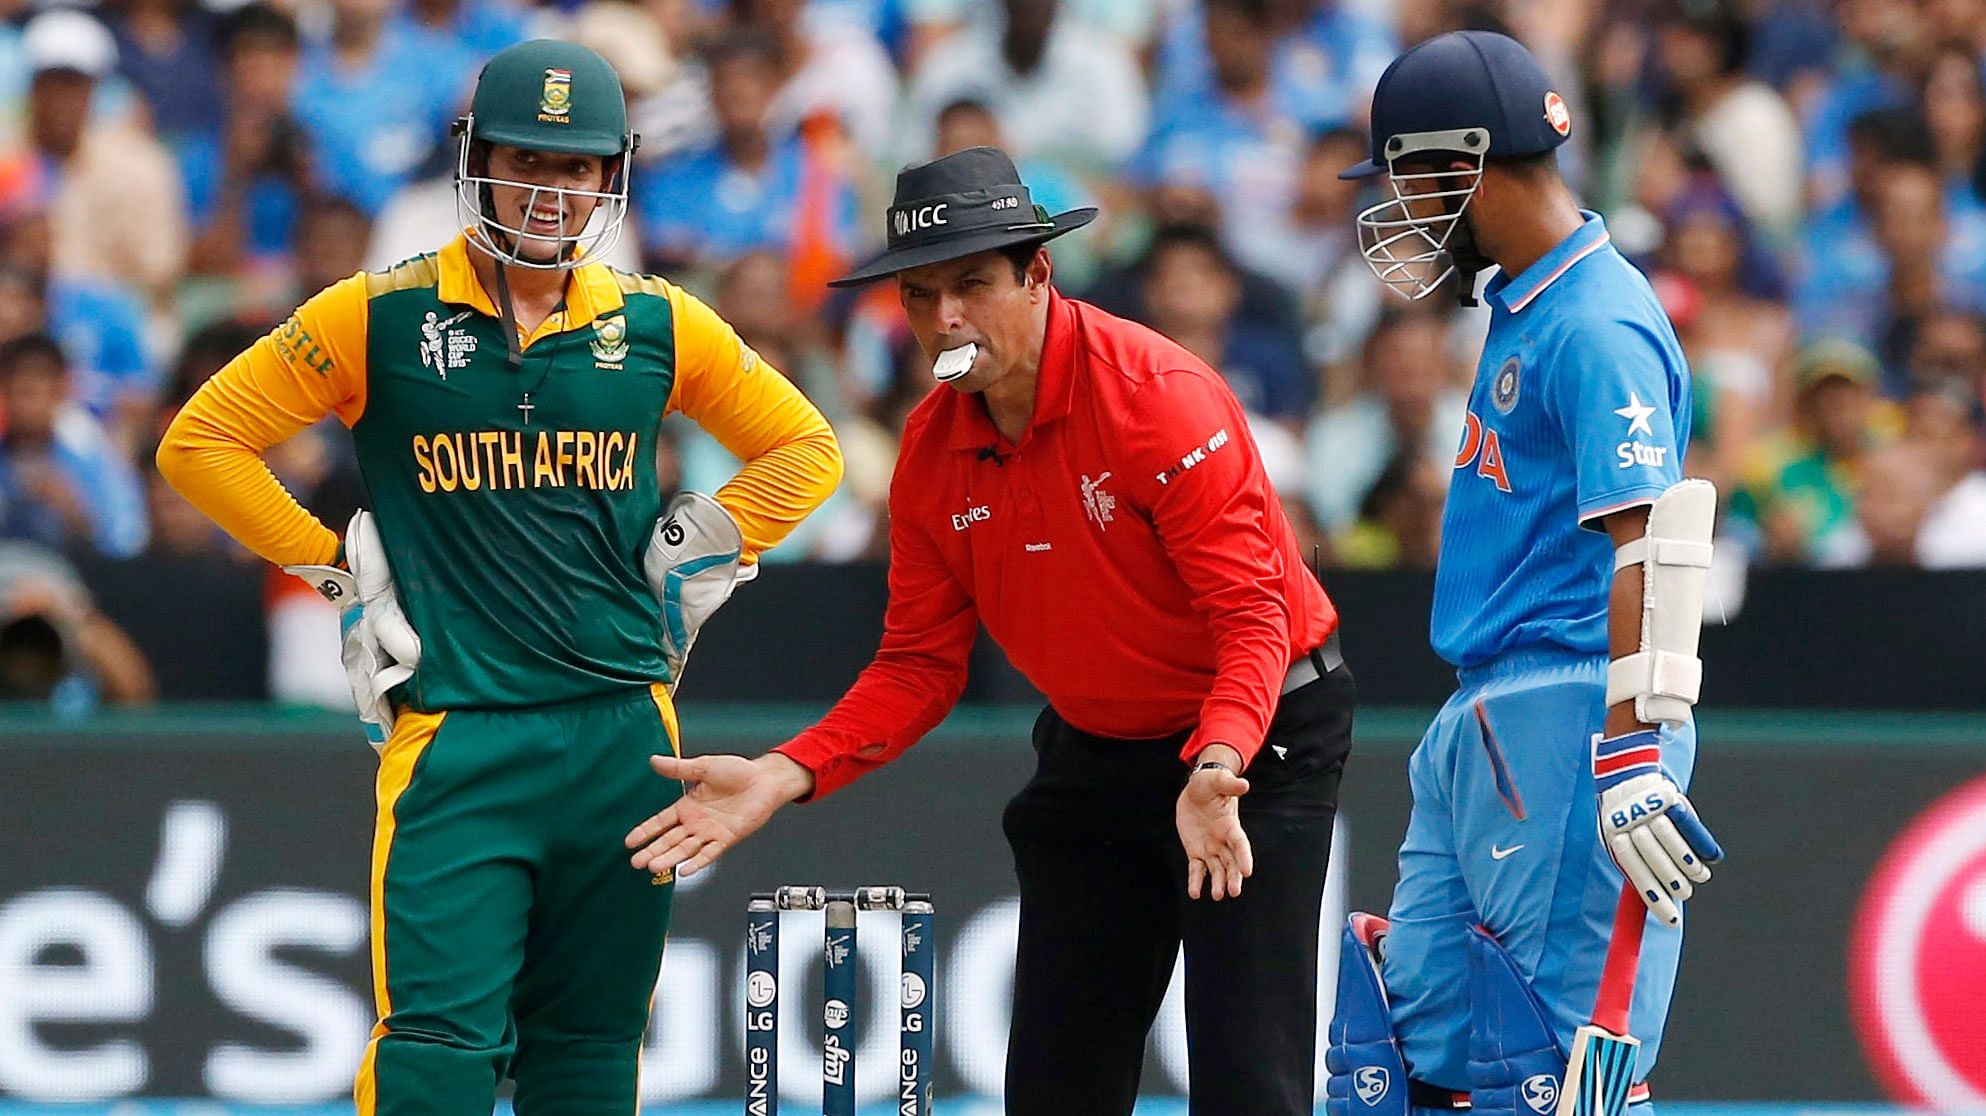 South African wicketkeeper Quinton de Kockas (left) and India’s Ajinkya Rahane (right) watch as umpire Aleem Dar sets the stumps during their ICC Cricket World Cup clash. (Photo: Reuters)